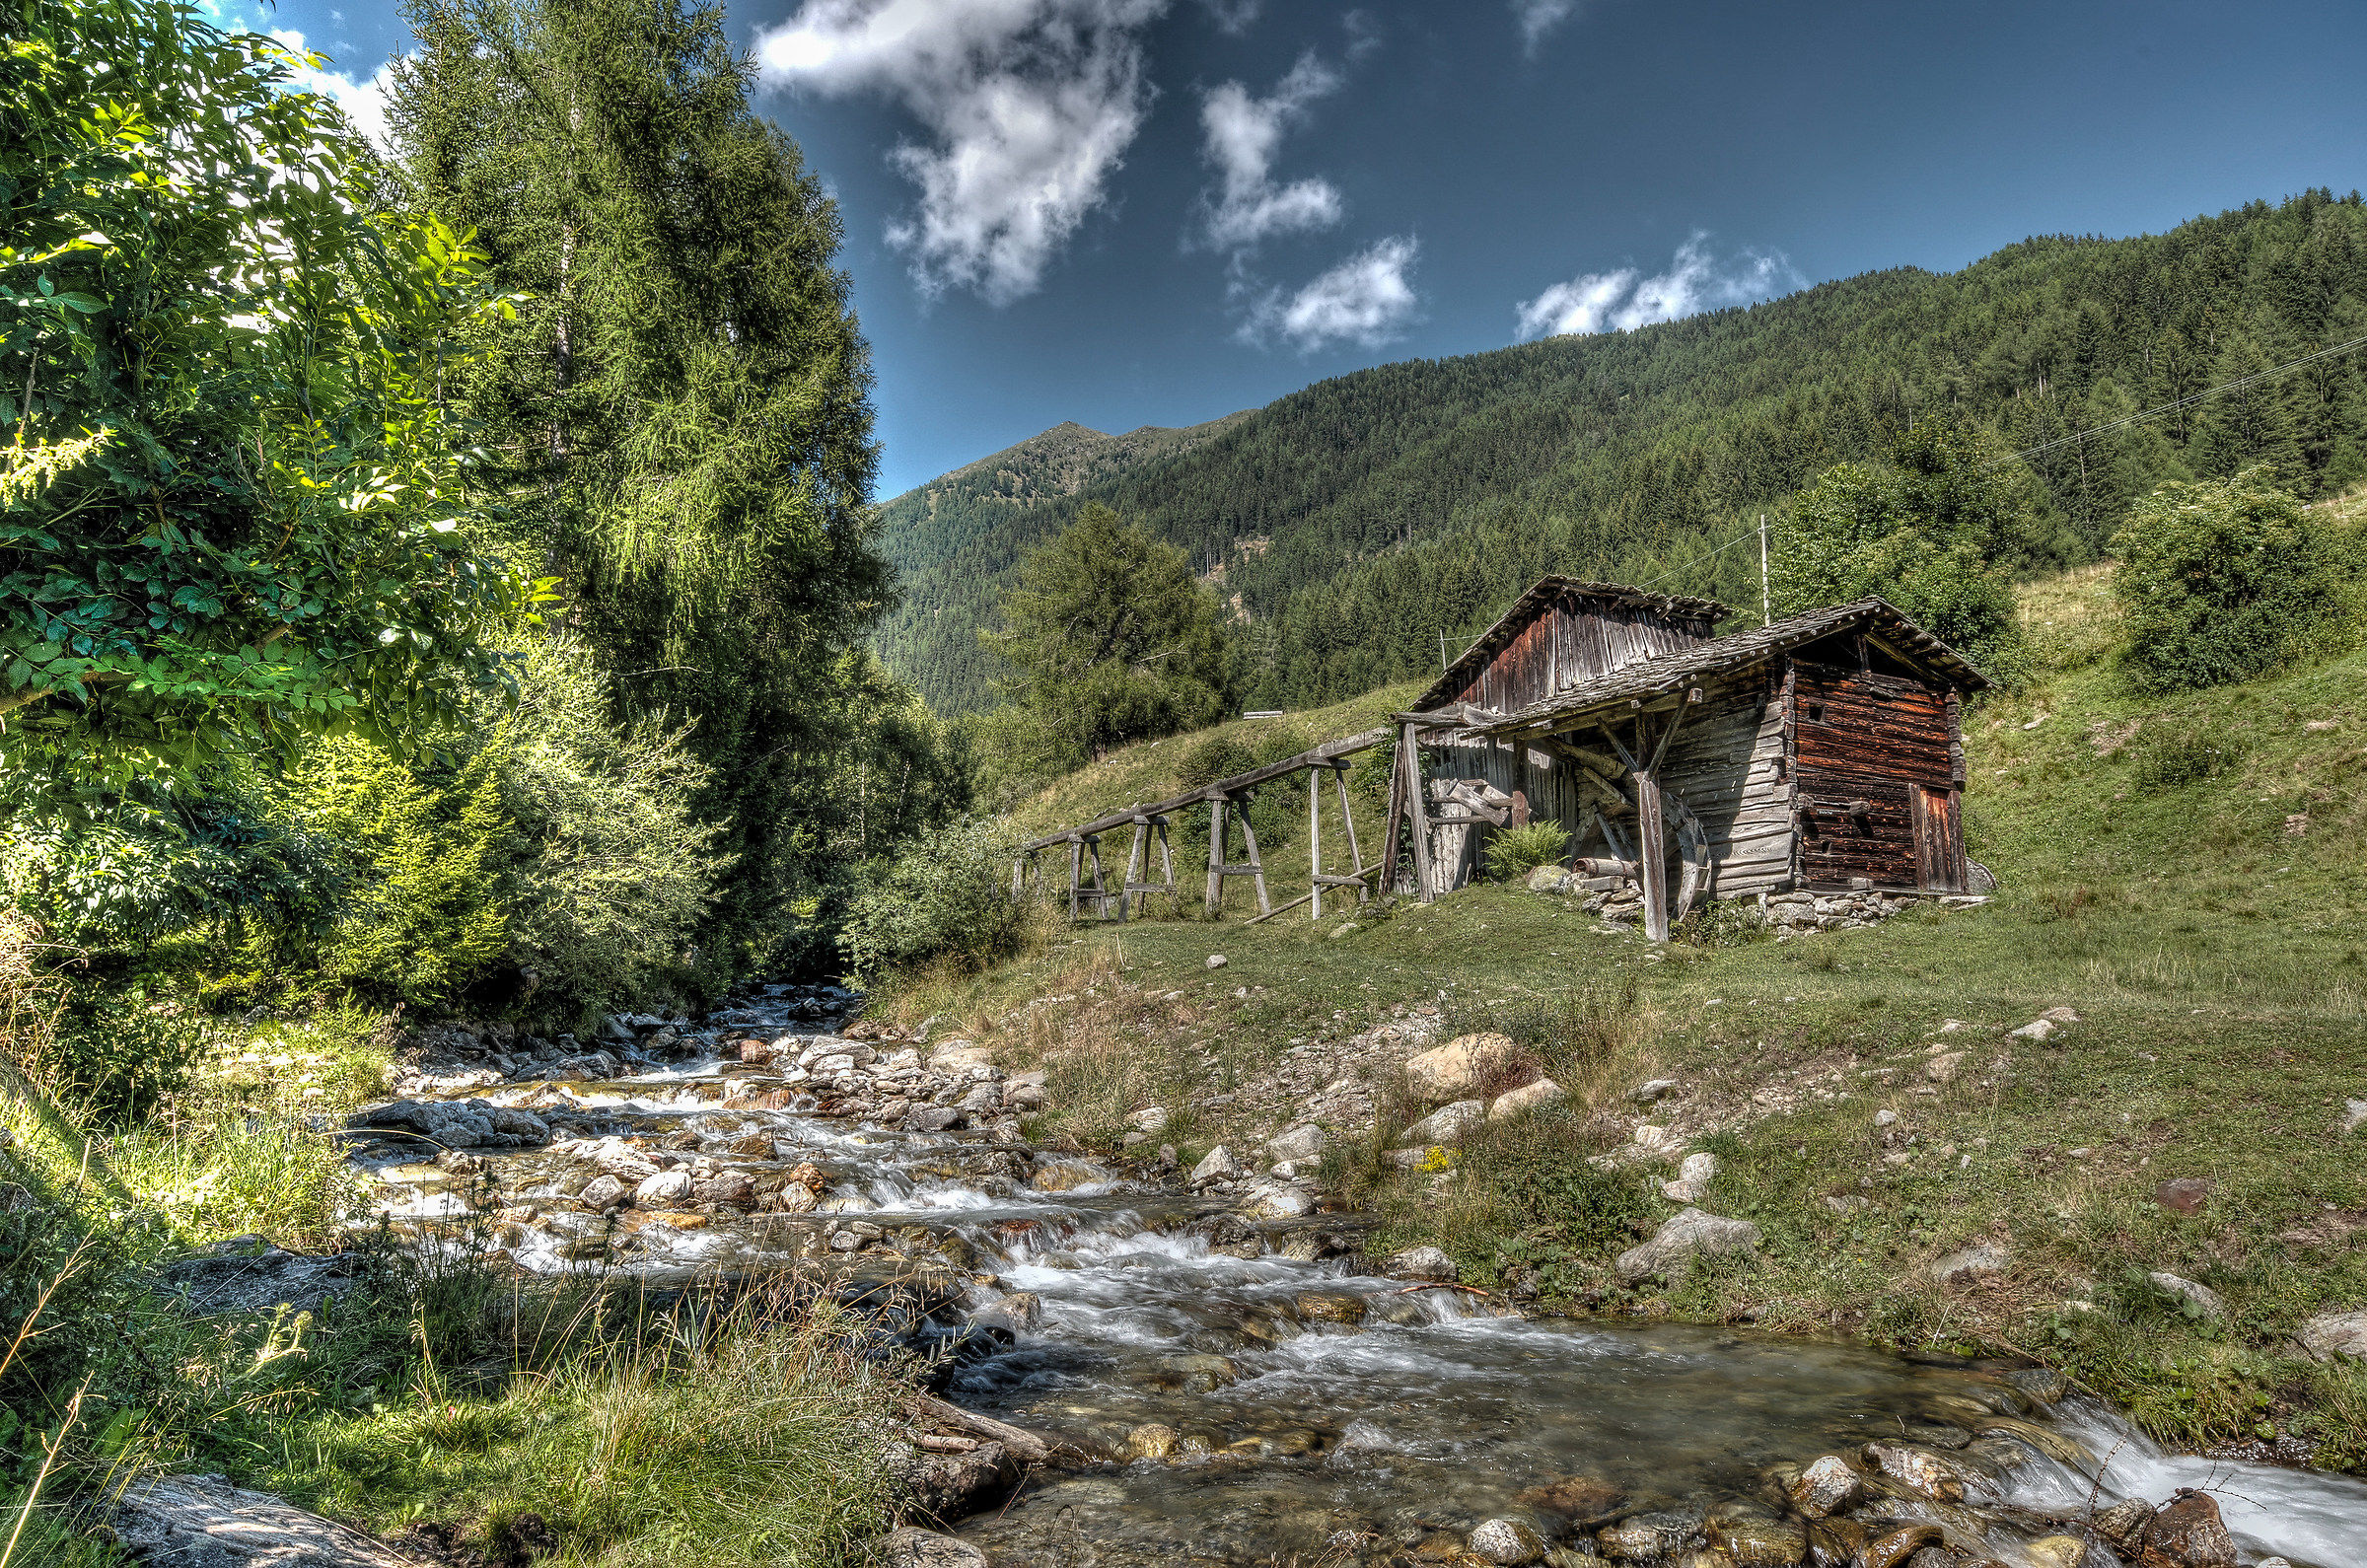 Tyrol- Terento ... one of the old mills...